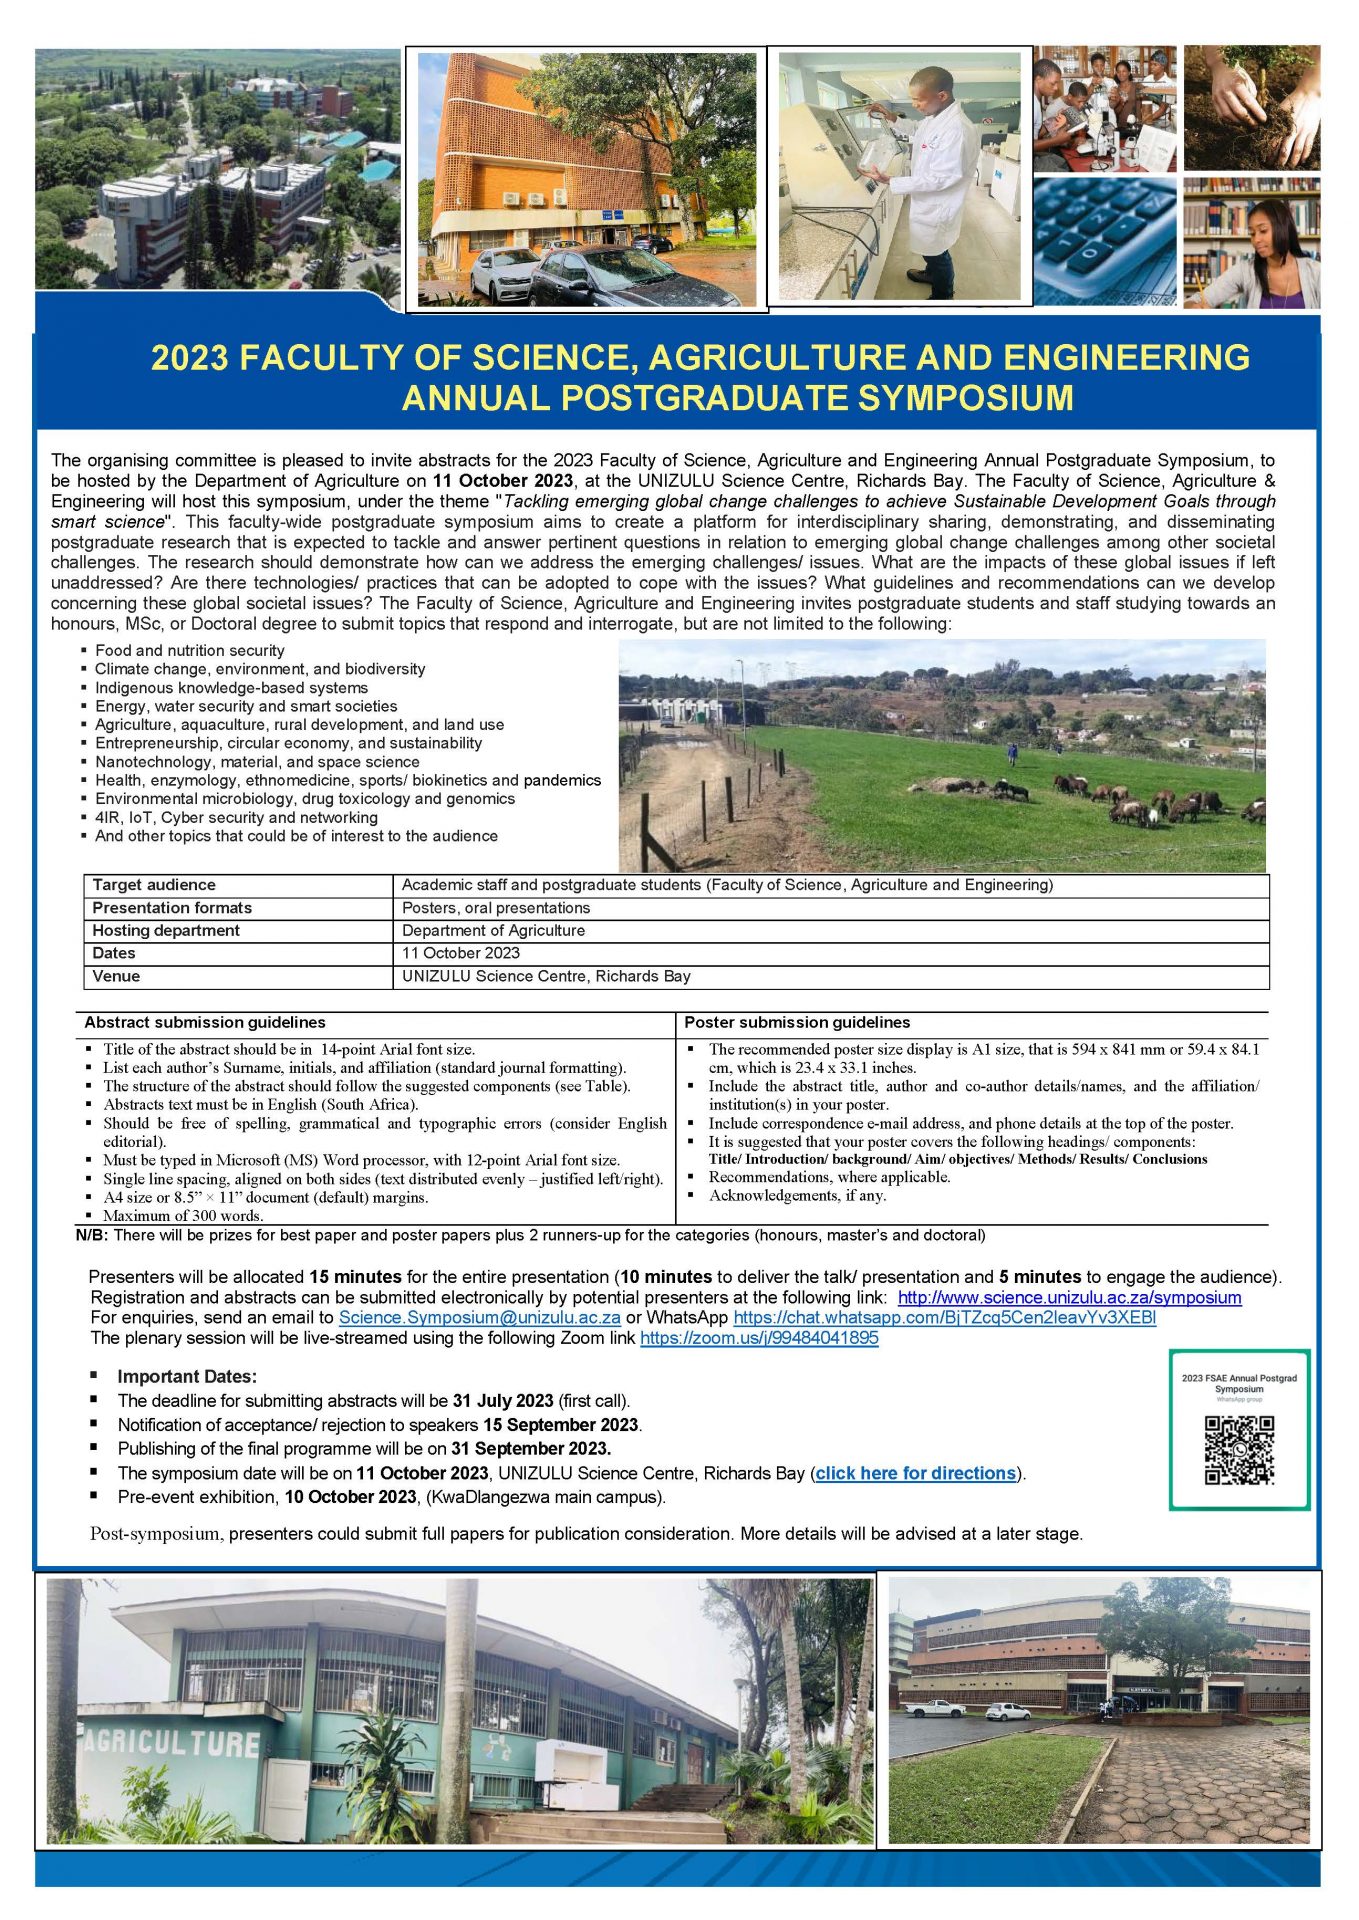 FACULTY OF SCIENCE AGRICULTURE AND ENGINEERING ANNUAL POSTGRADUATE SYMPOSIUM 2023